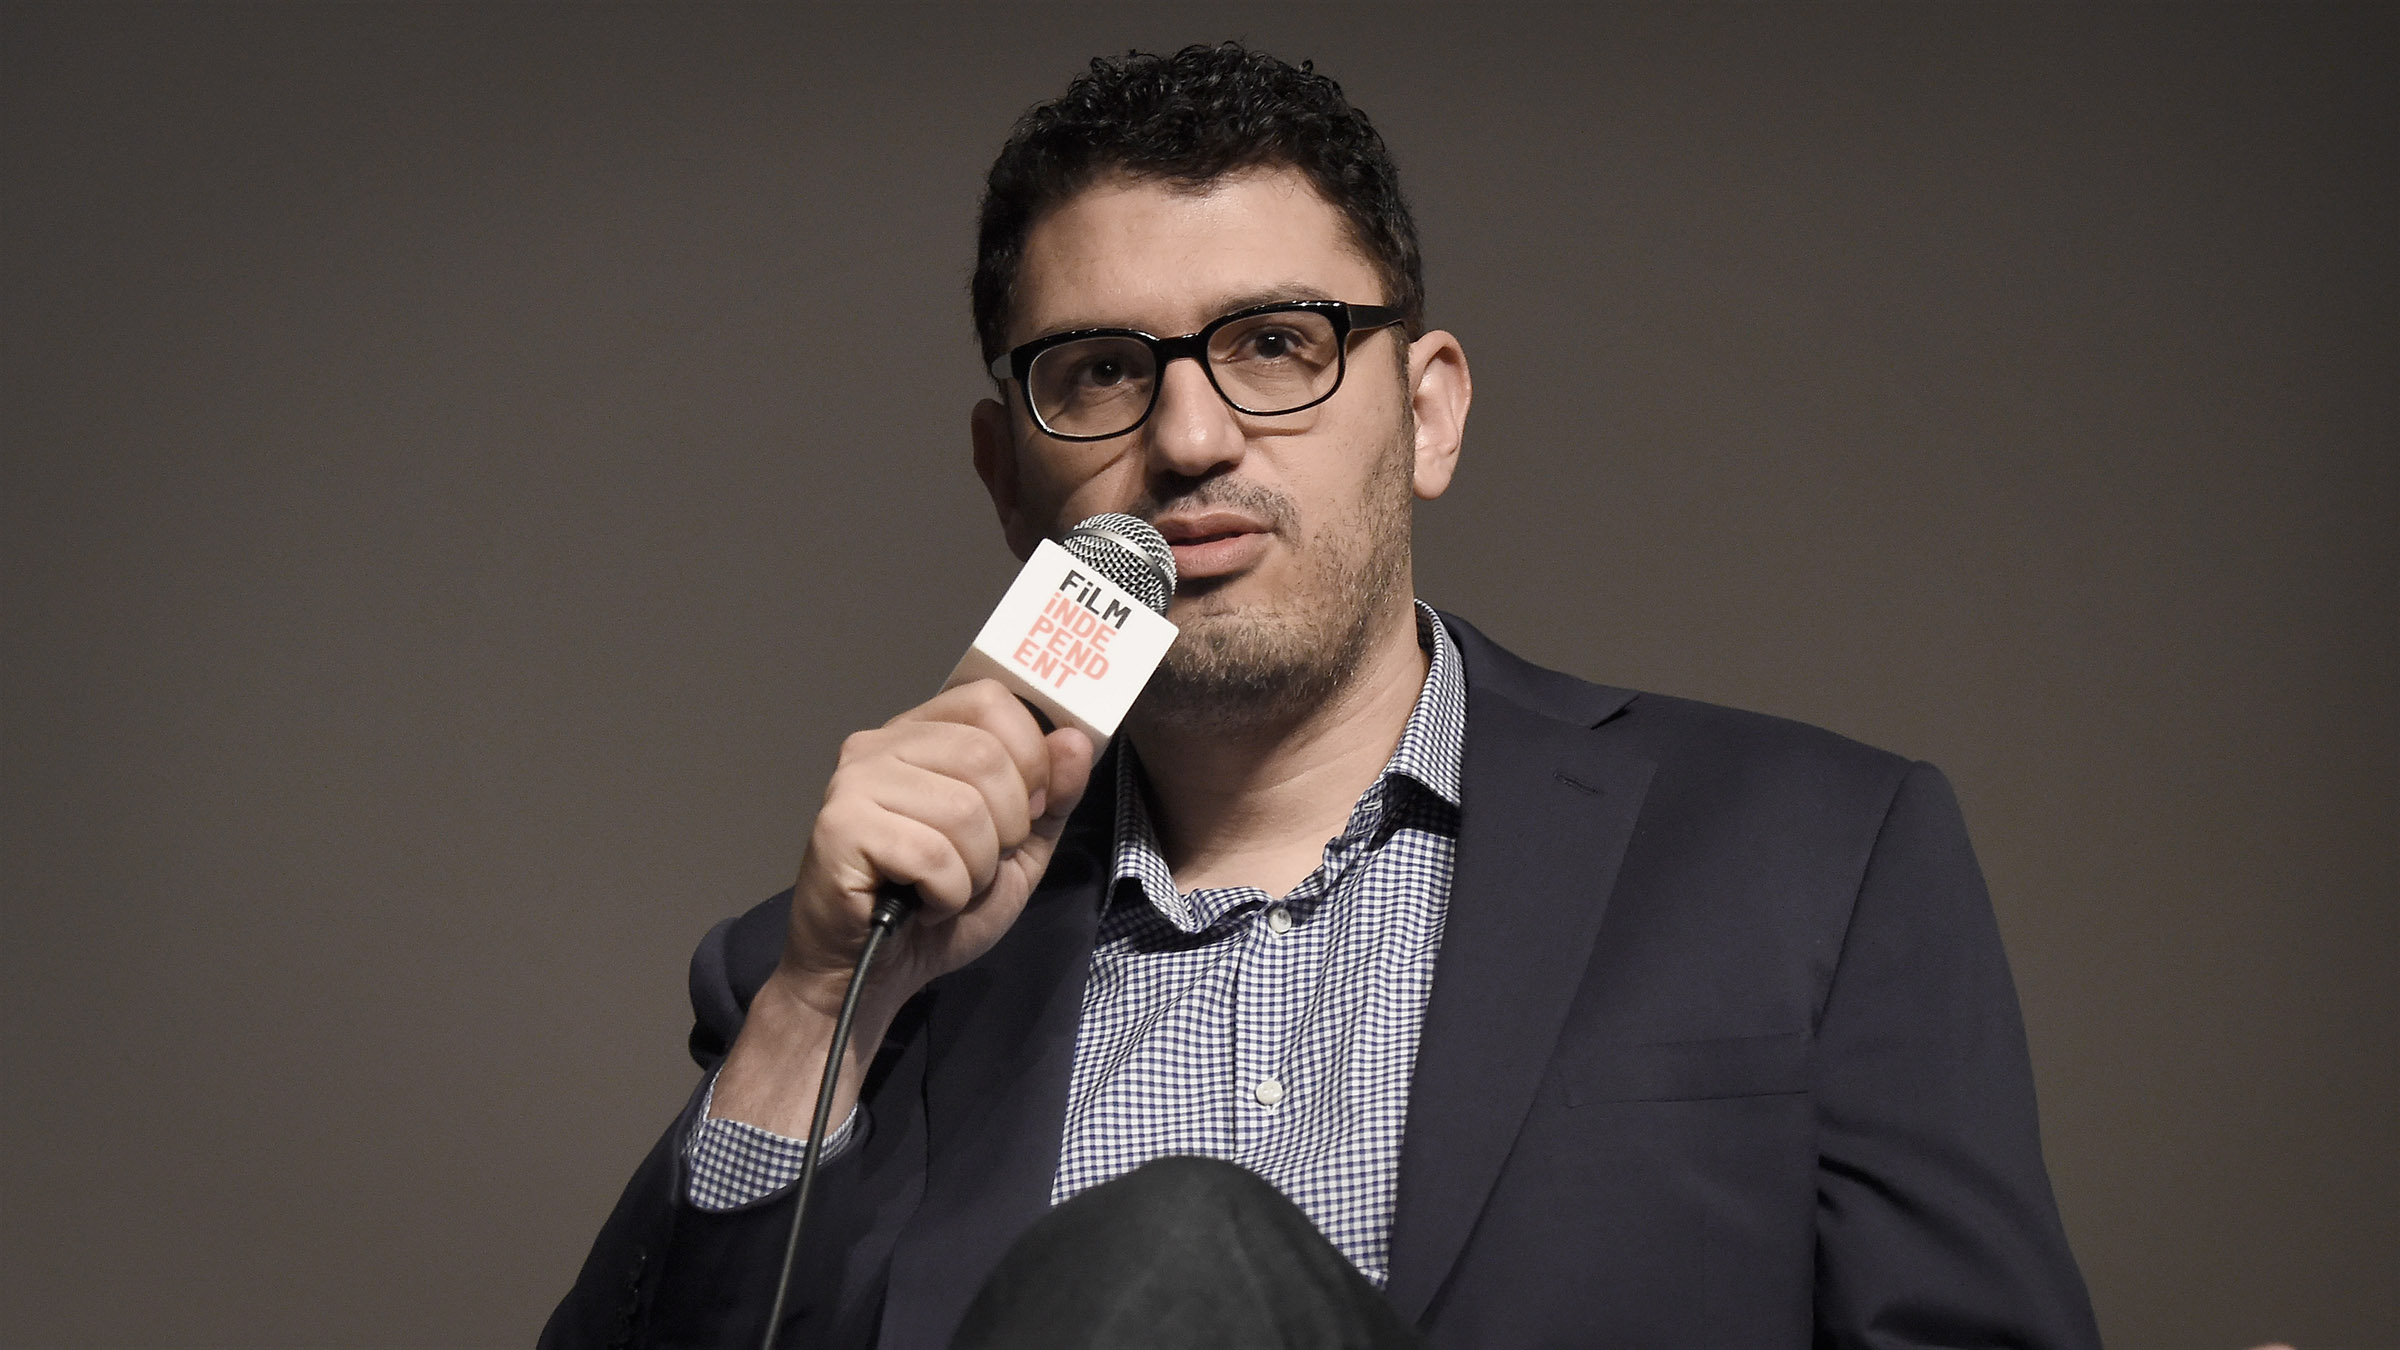 Mr. Robot' Creator Sam Esmail Says Anxiety And Hacking Inspired